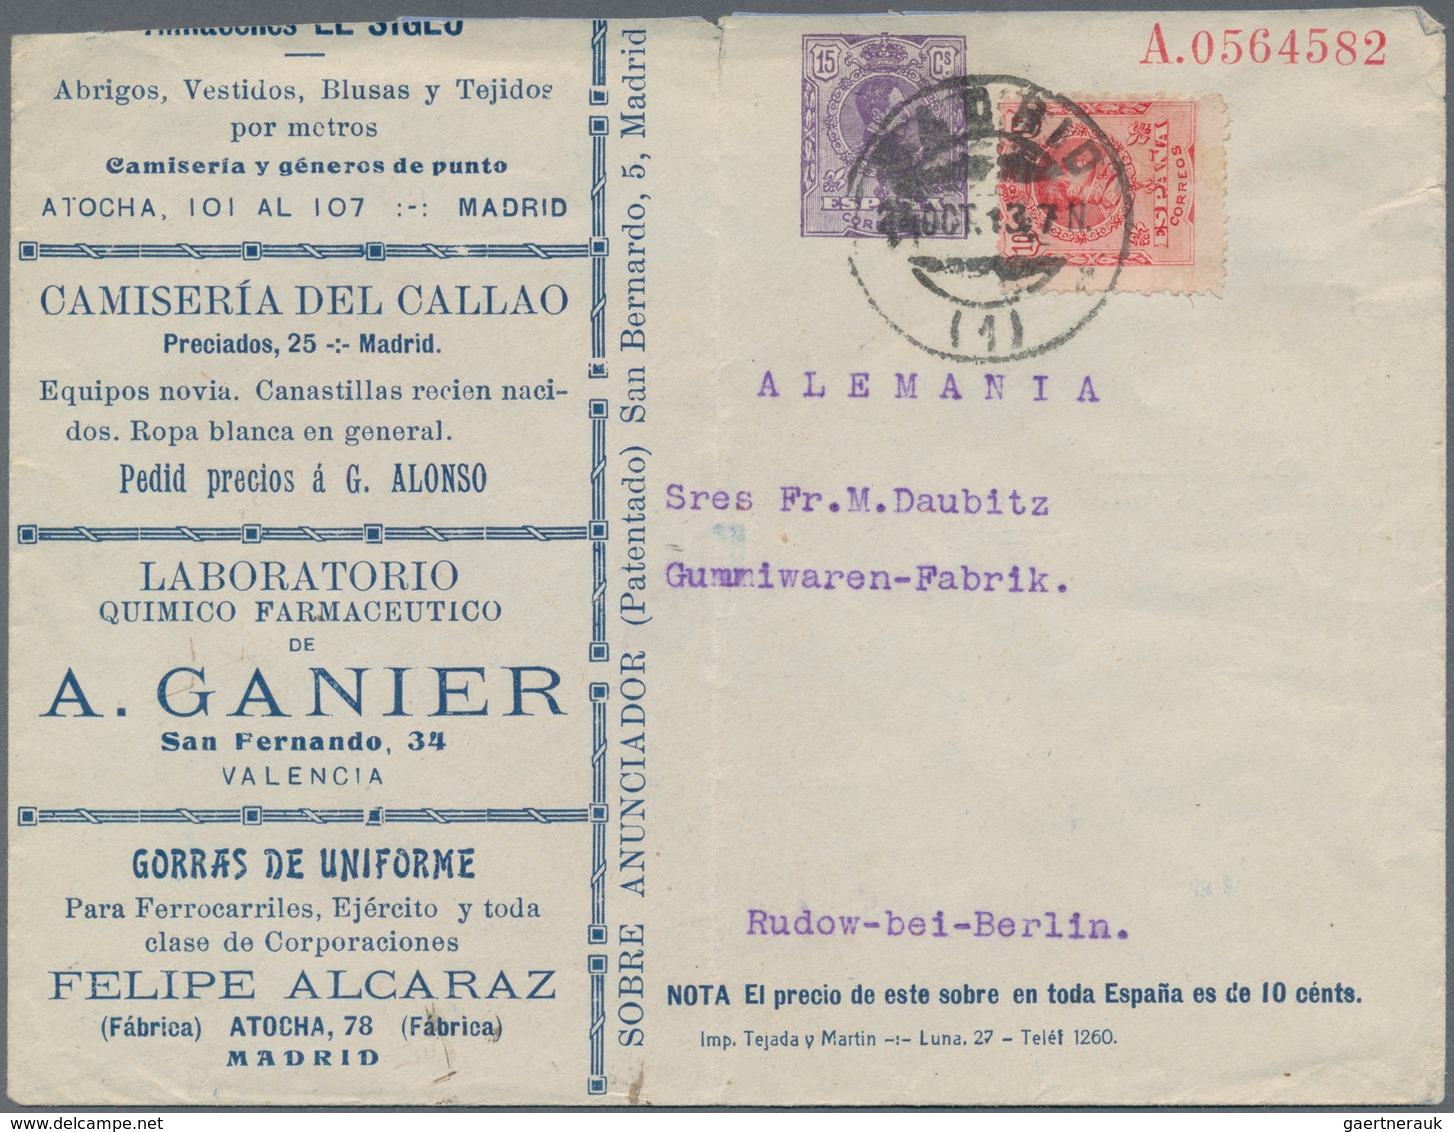 Thematik: Anzeigenganzsachen / Advertising Postal Stationery: 1913, Spain. Private Ad Cover 15c Viol - Unclassified